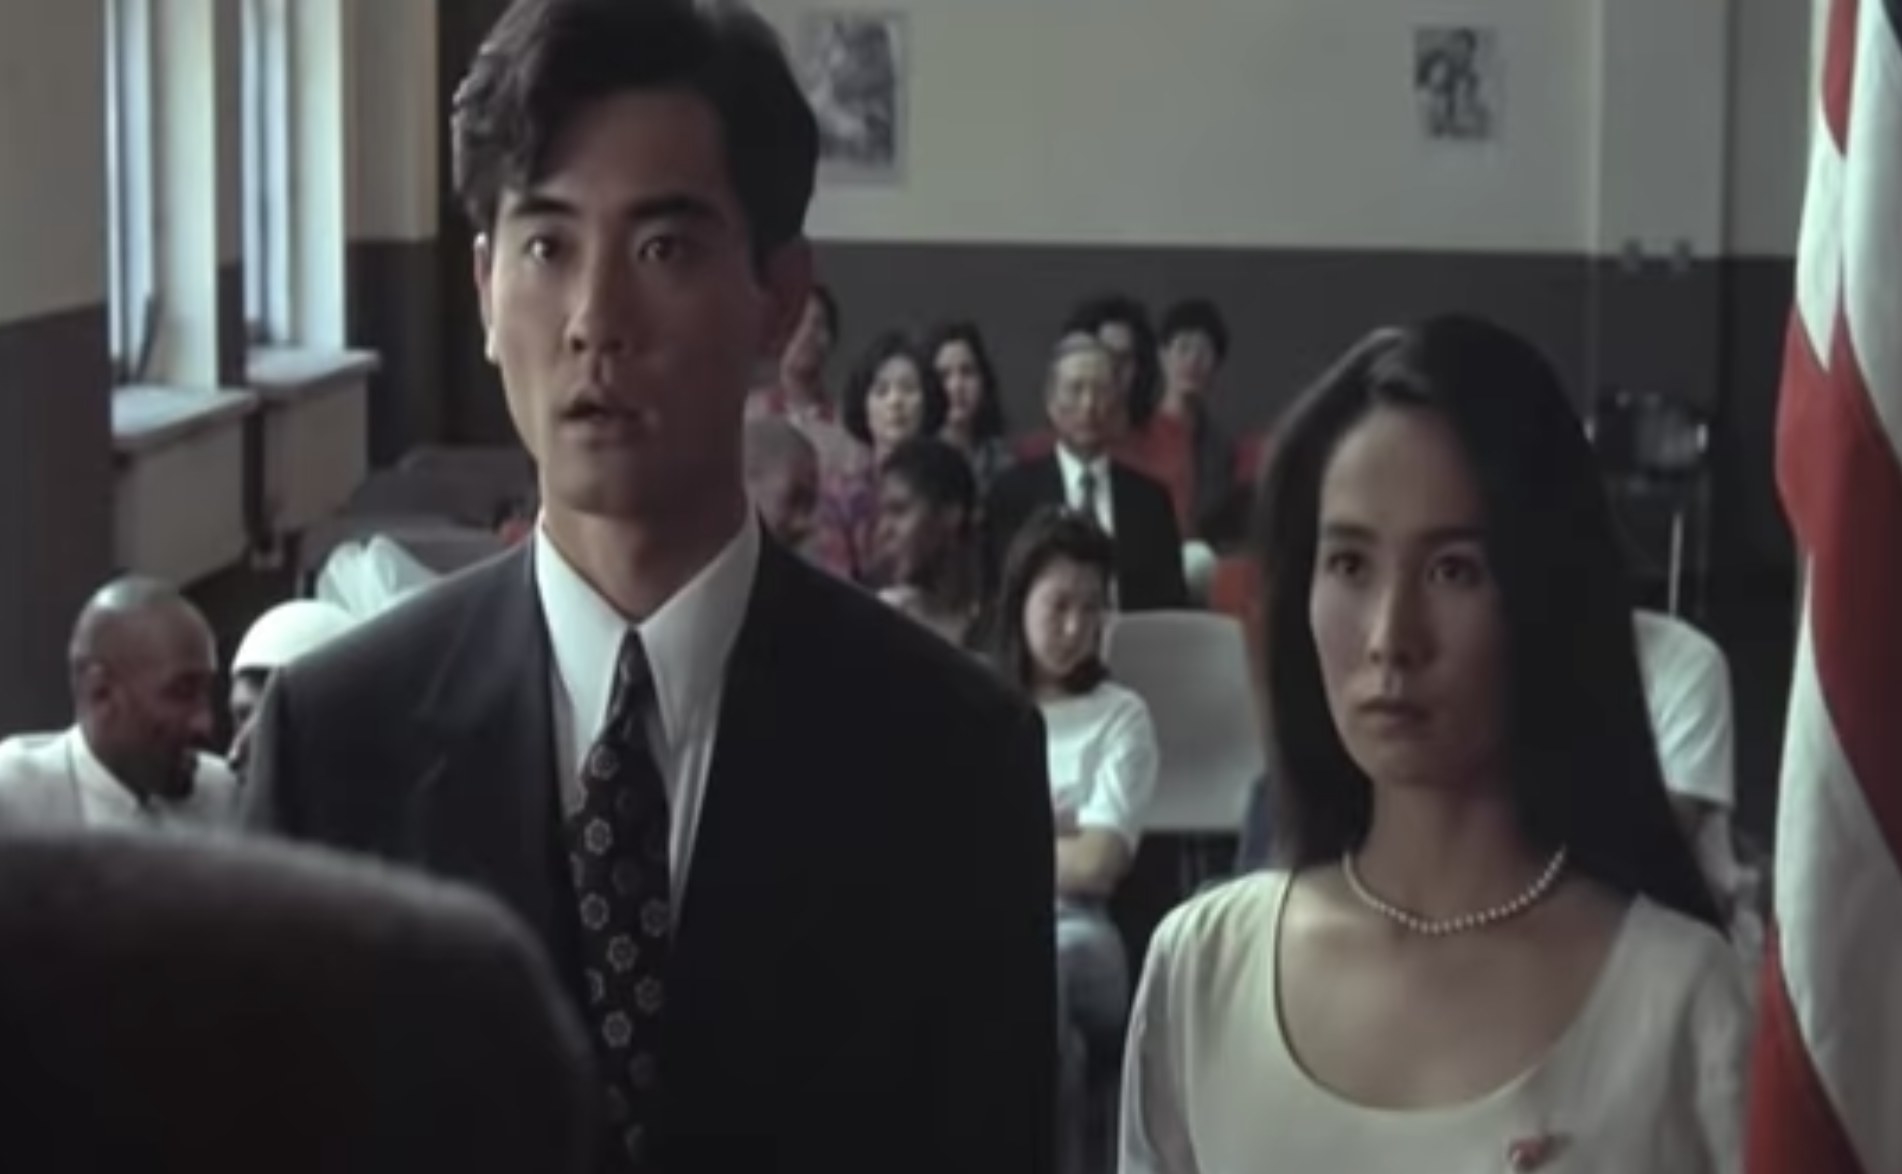 Actors Winston Chao and May Chin stand beside each other in a courtroom looking surprised.